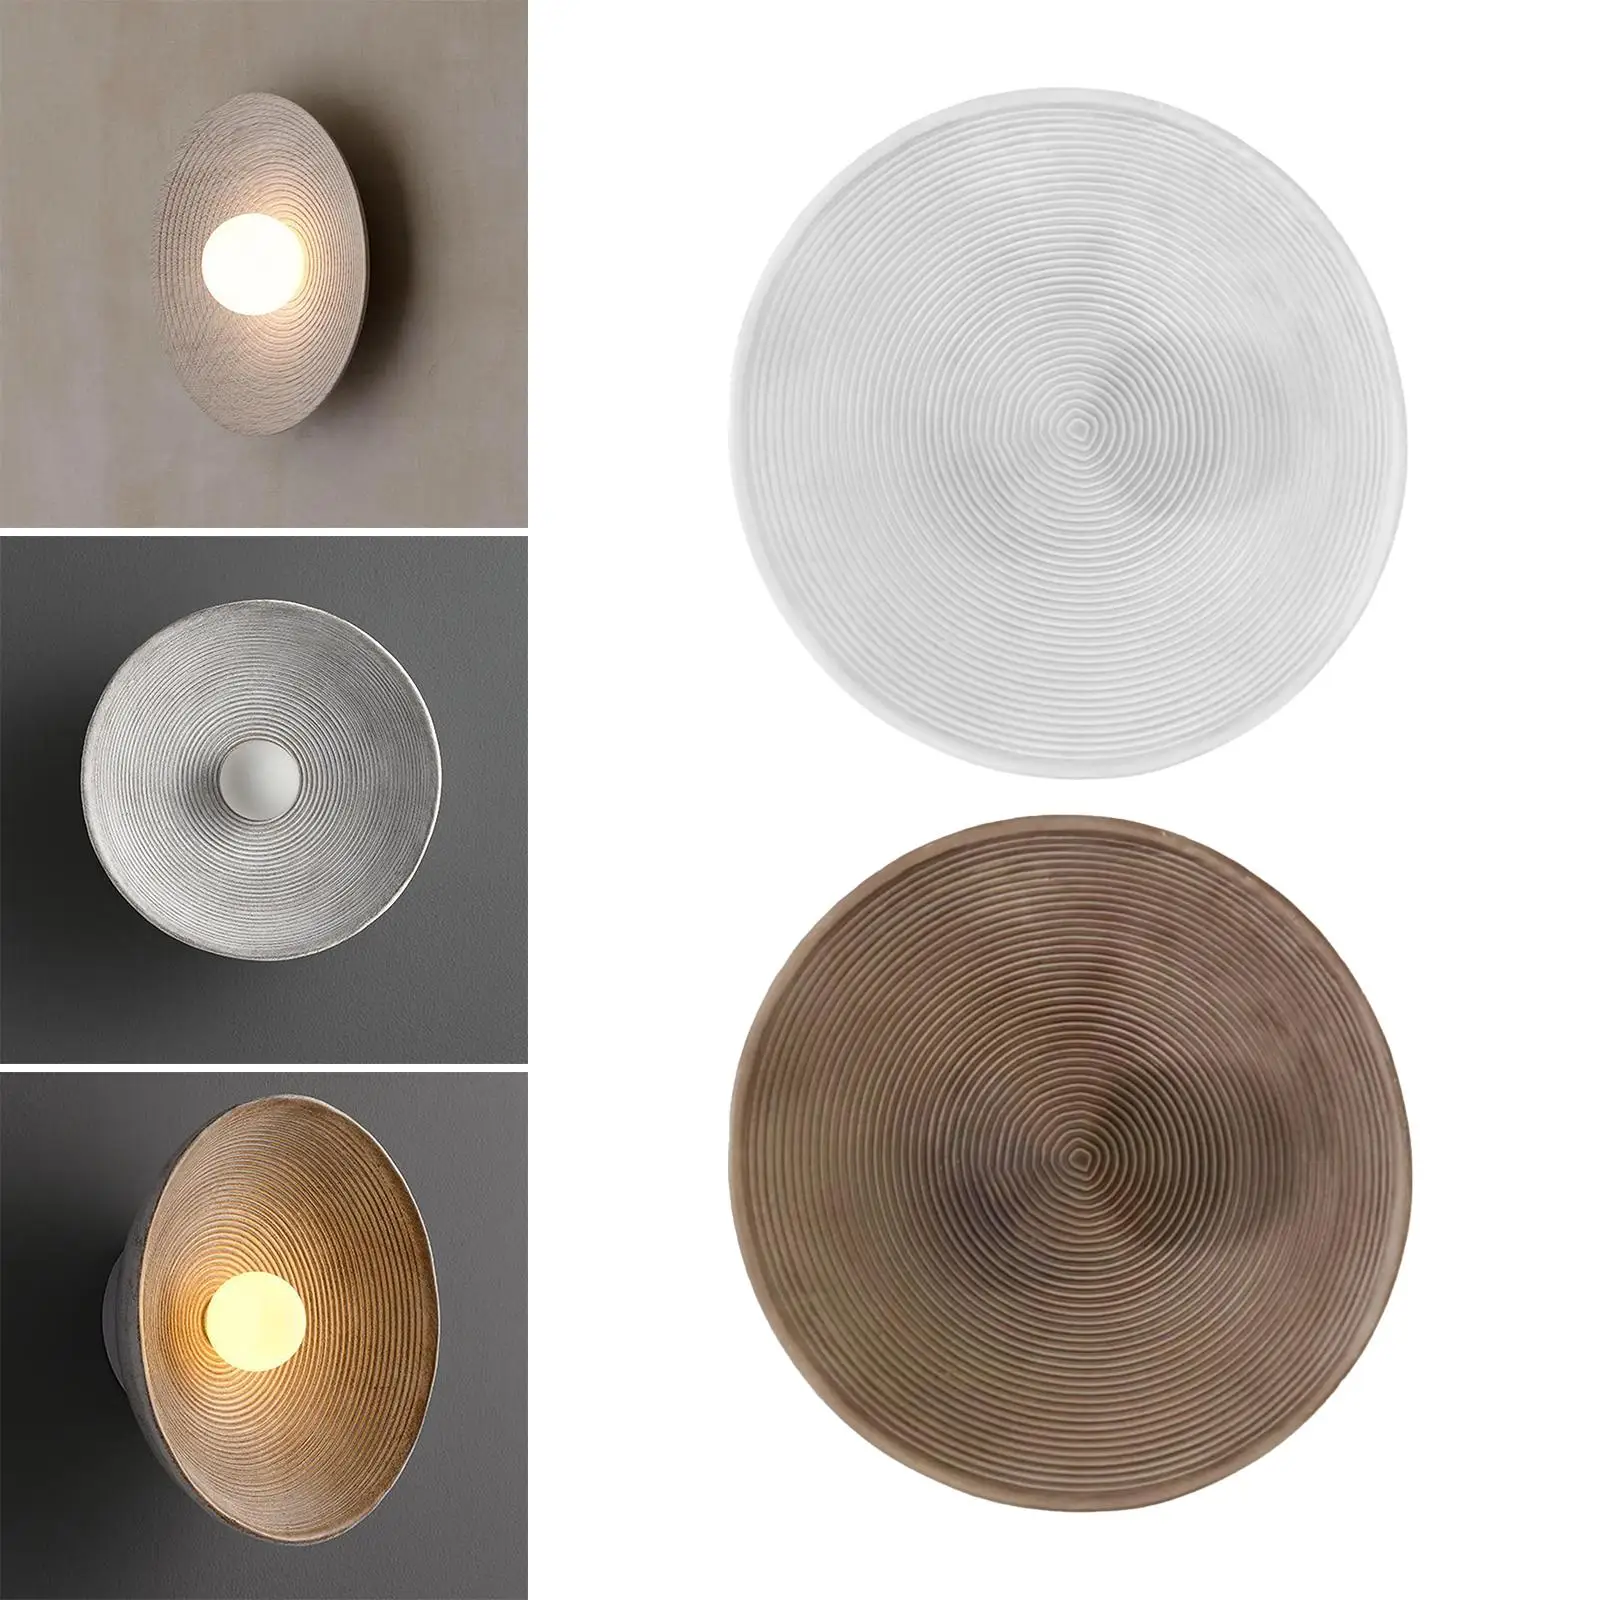 Round Wall Lamp Glass Lamp Shade Cover Wall Lights Fixtures Wall Sconces Lighting for Bathroom Decoration Kitchen Island Office